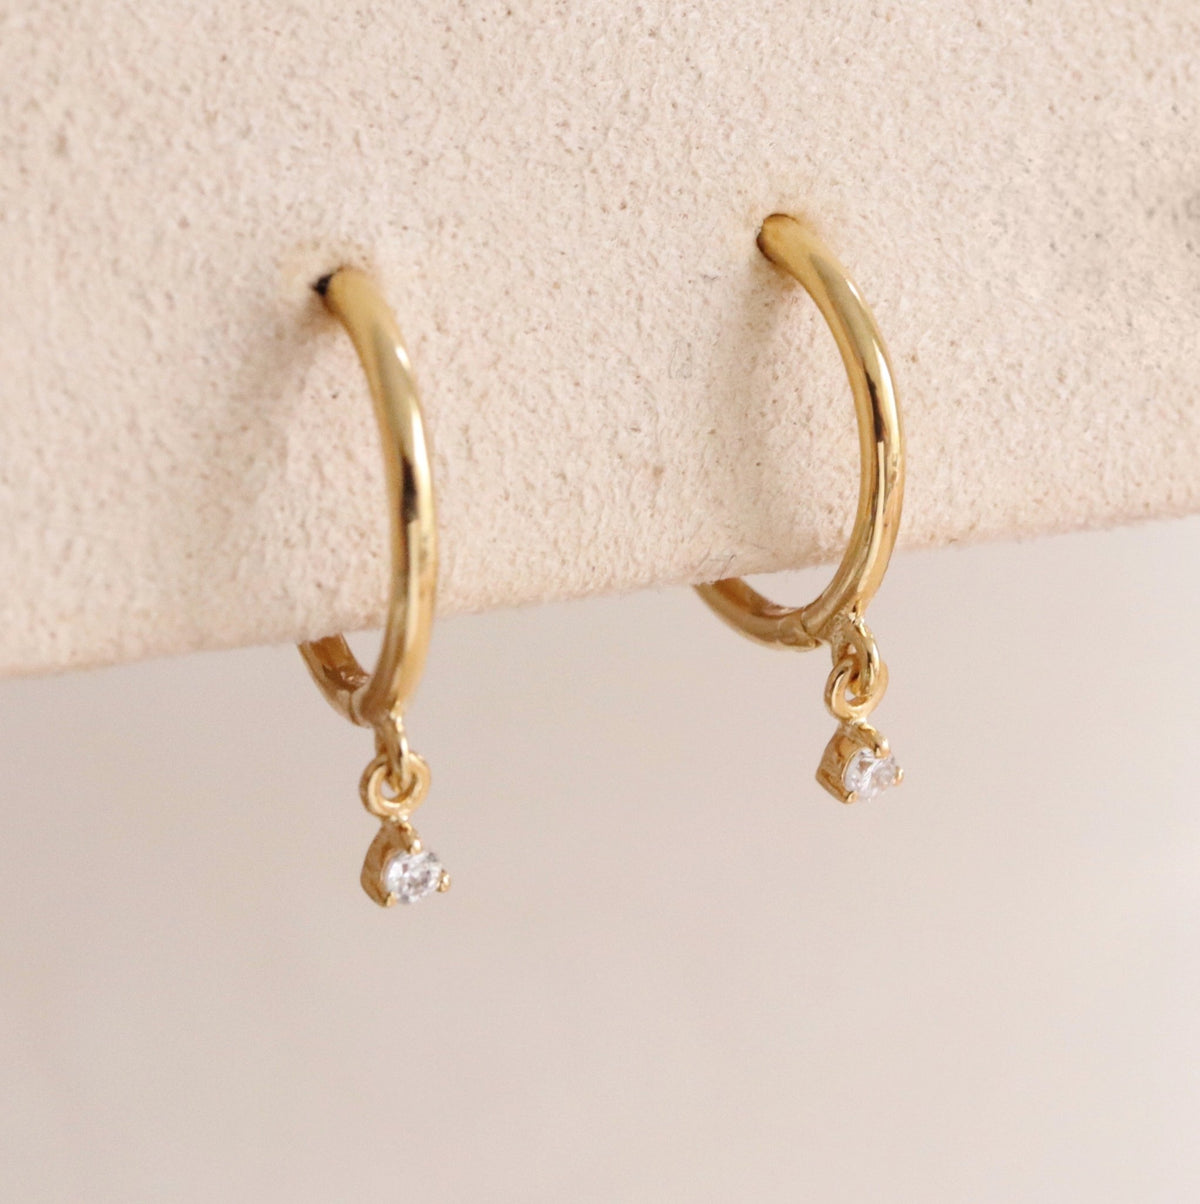 LOVE CHARM HUGGIE HOOPS - CUBIC ZIRCONIA &amp; GOLD - SO PRETTY CARA COTTER